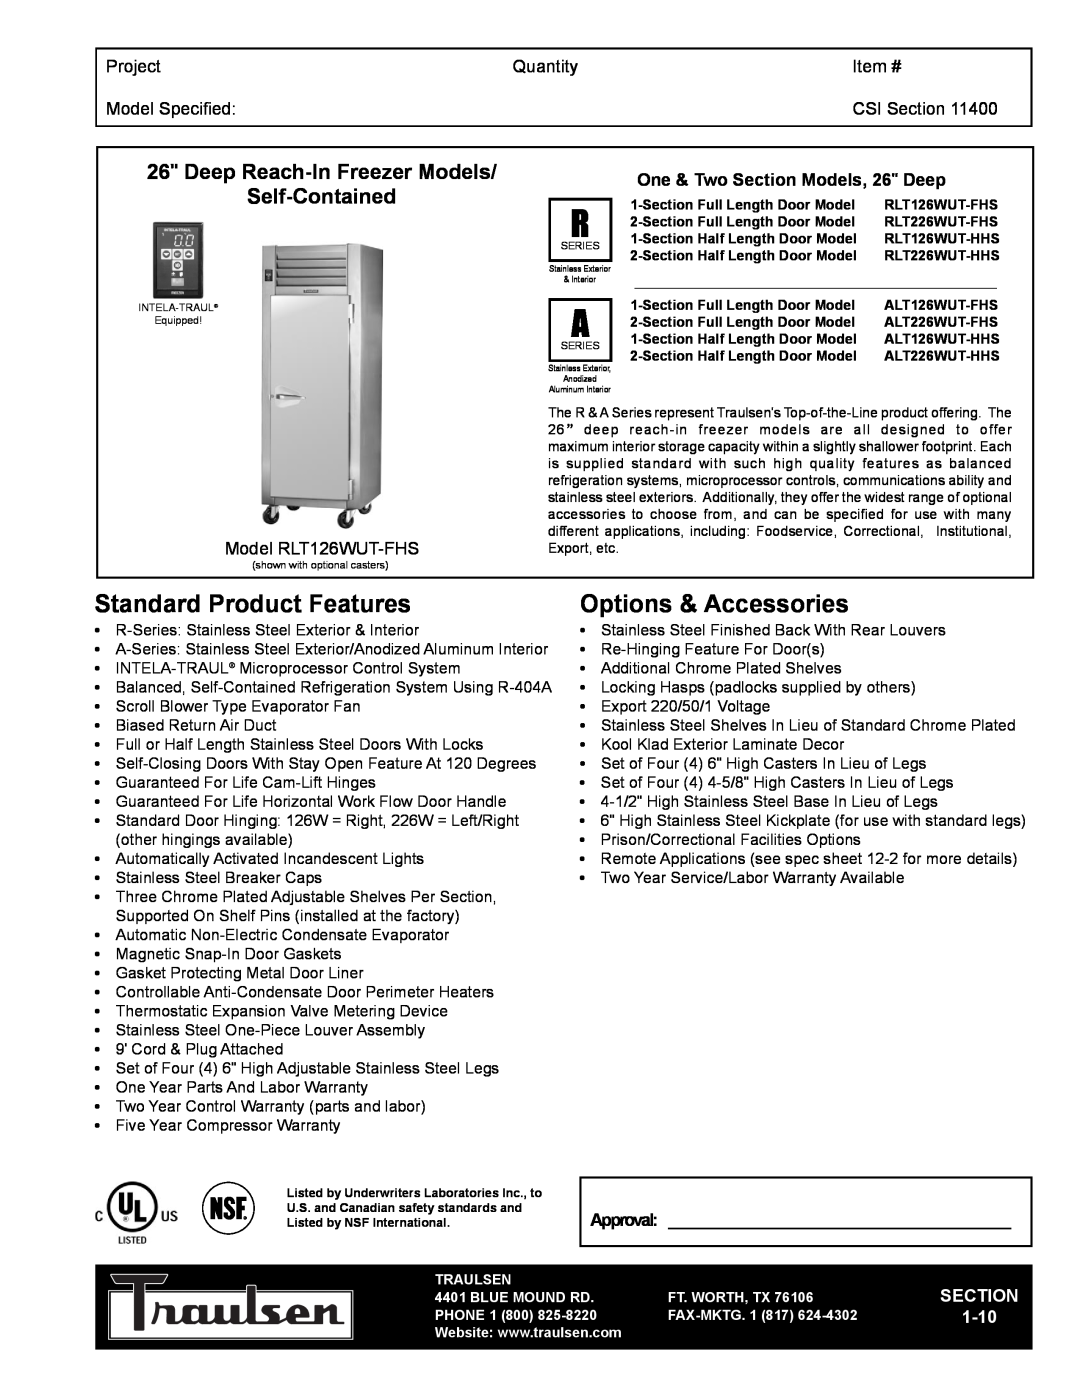 Traulsen ALT126WUT-HHS warranty Project, Quantity, Item #, Model Specified, CSI Section, 1-10, Standard Product Features 